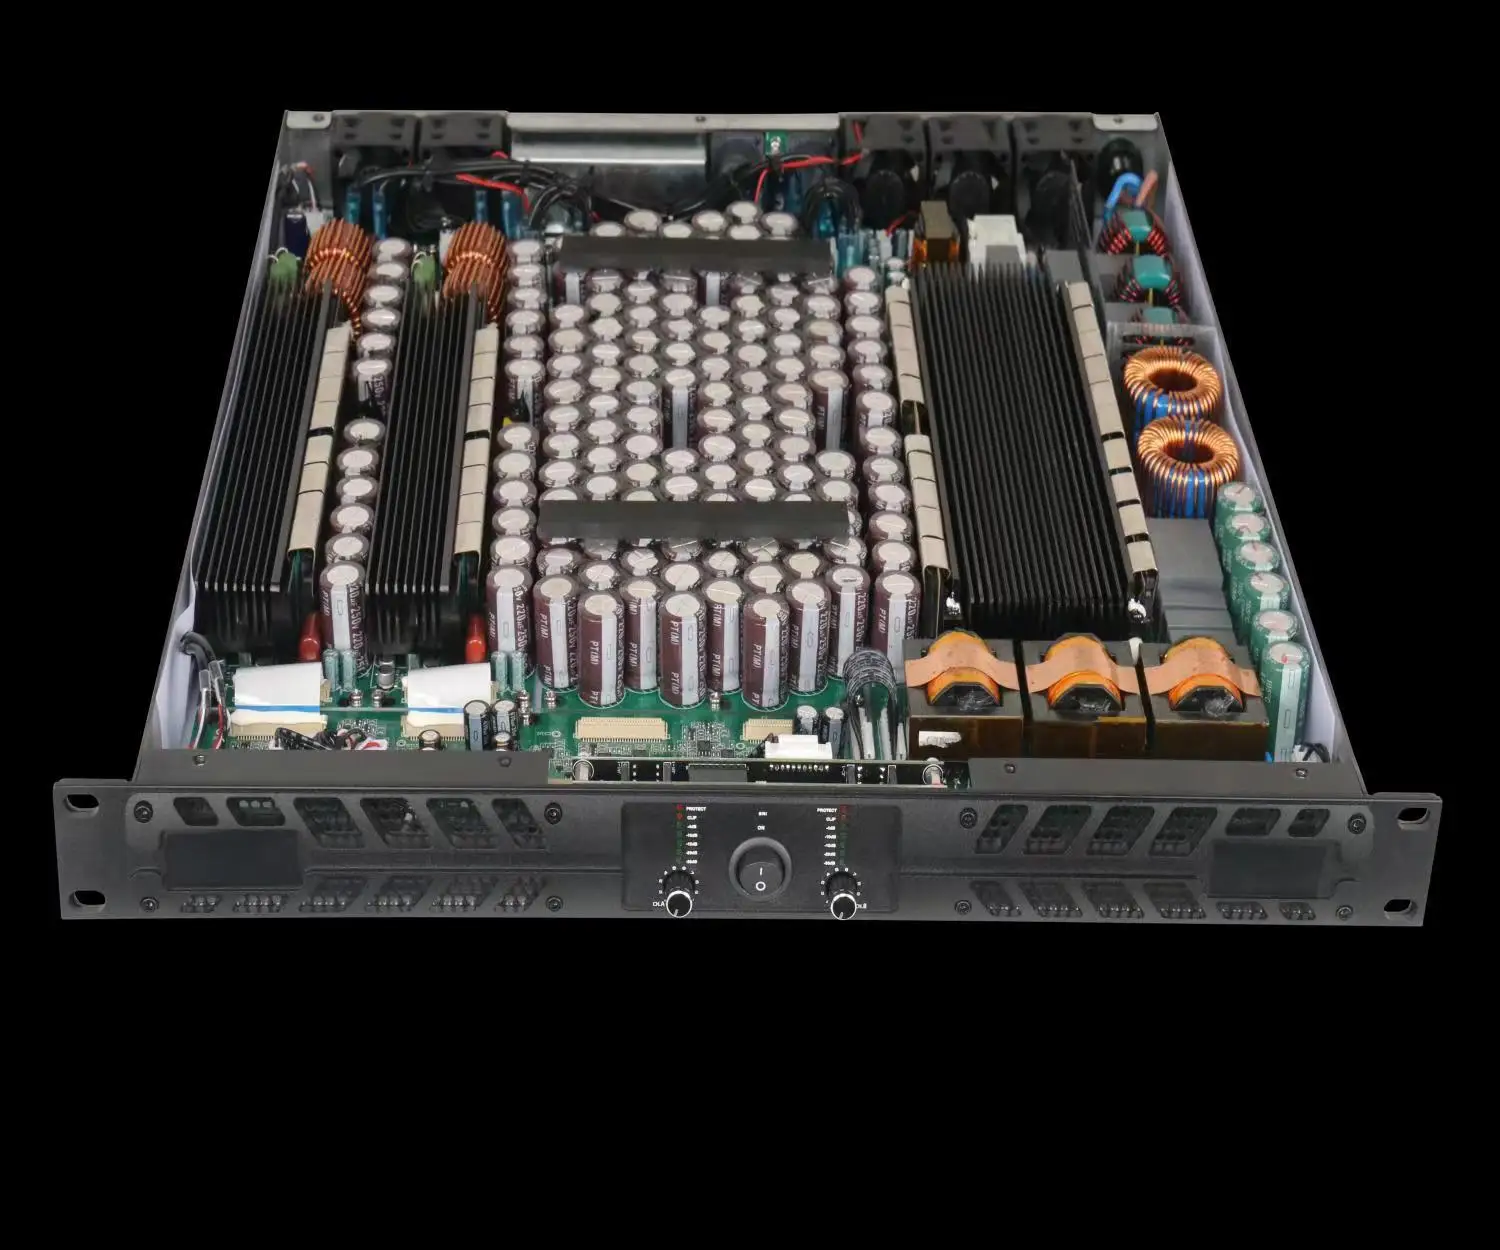 High quality 1U digital power amplifier 4500w with pfc function, high power